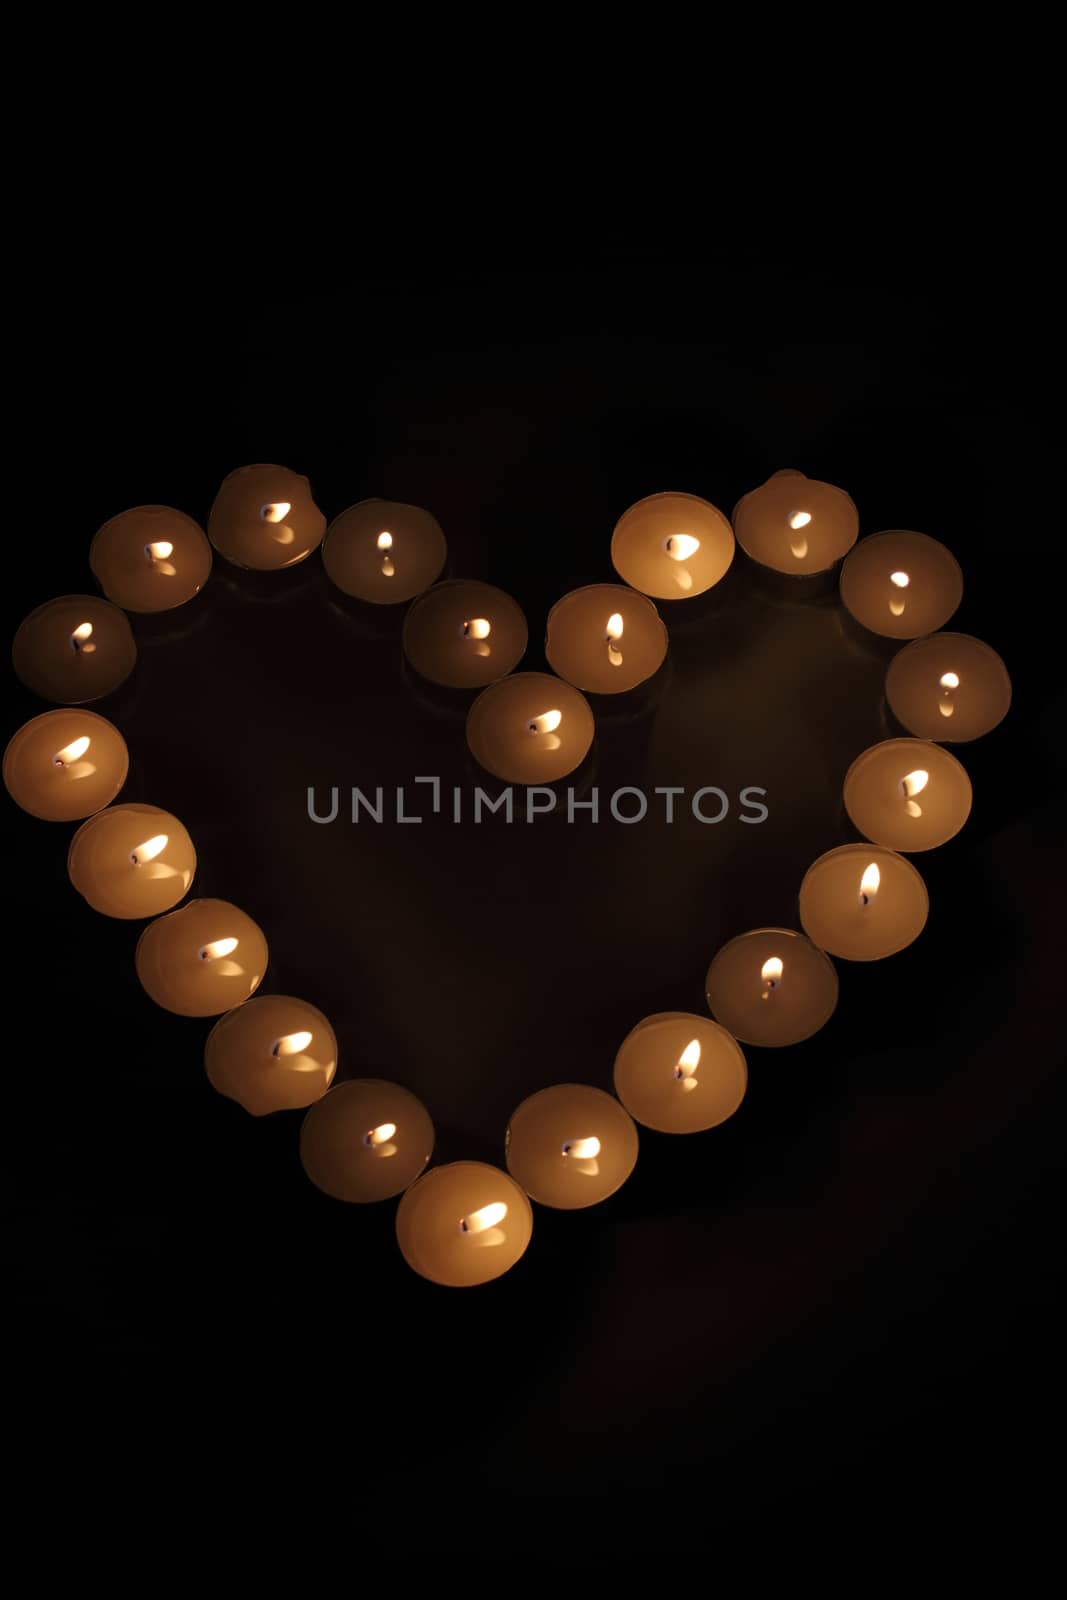 Heart of candles by Metanna